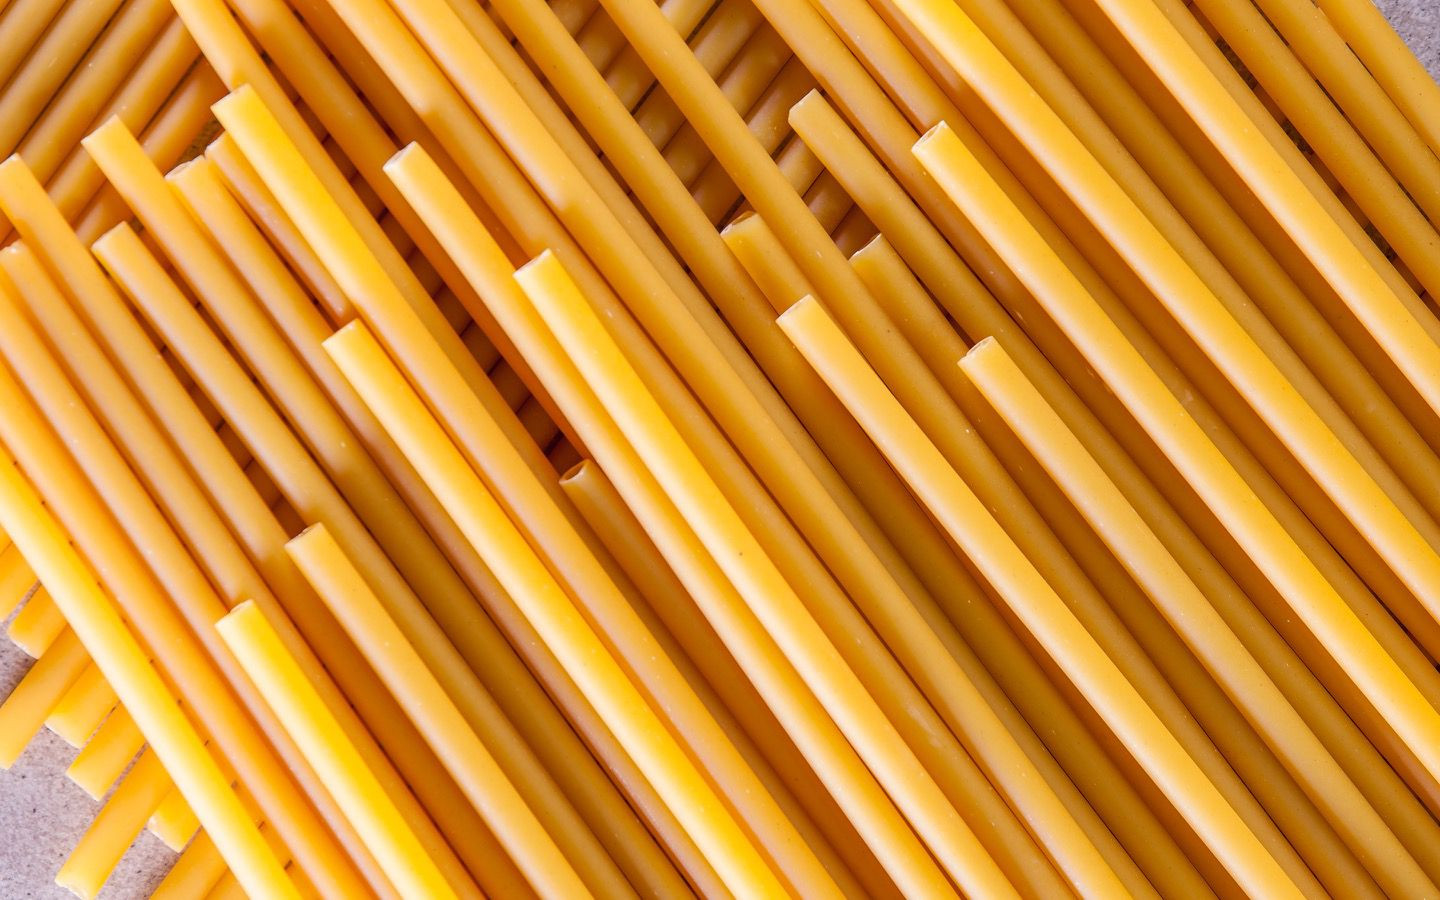 Stroodles - The Pasta Straws